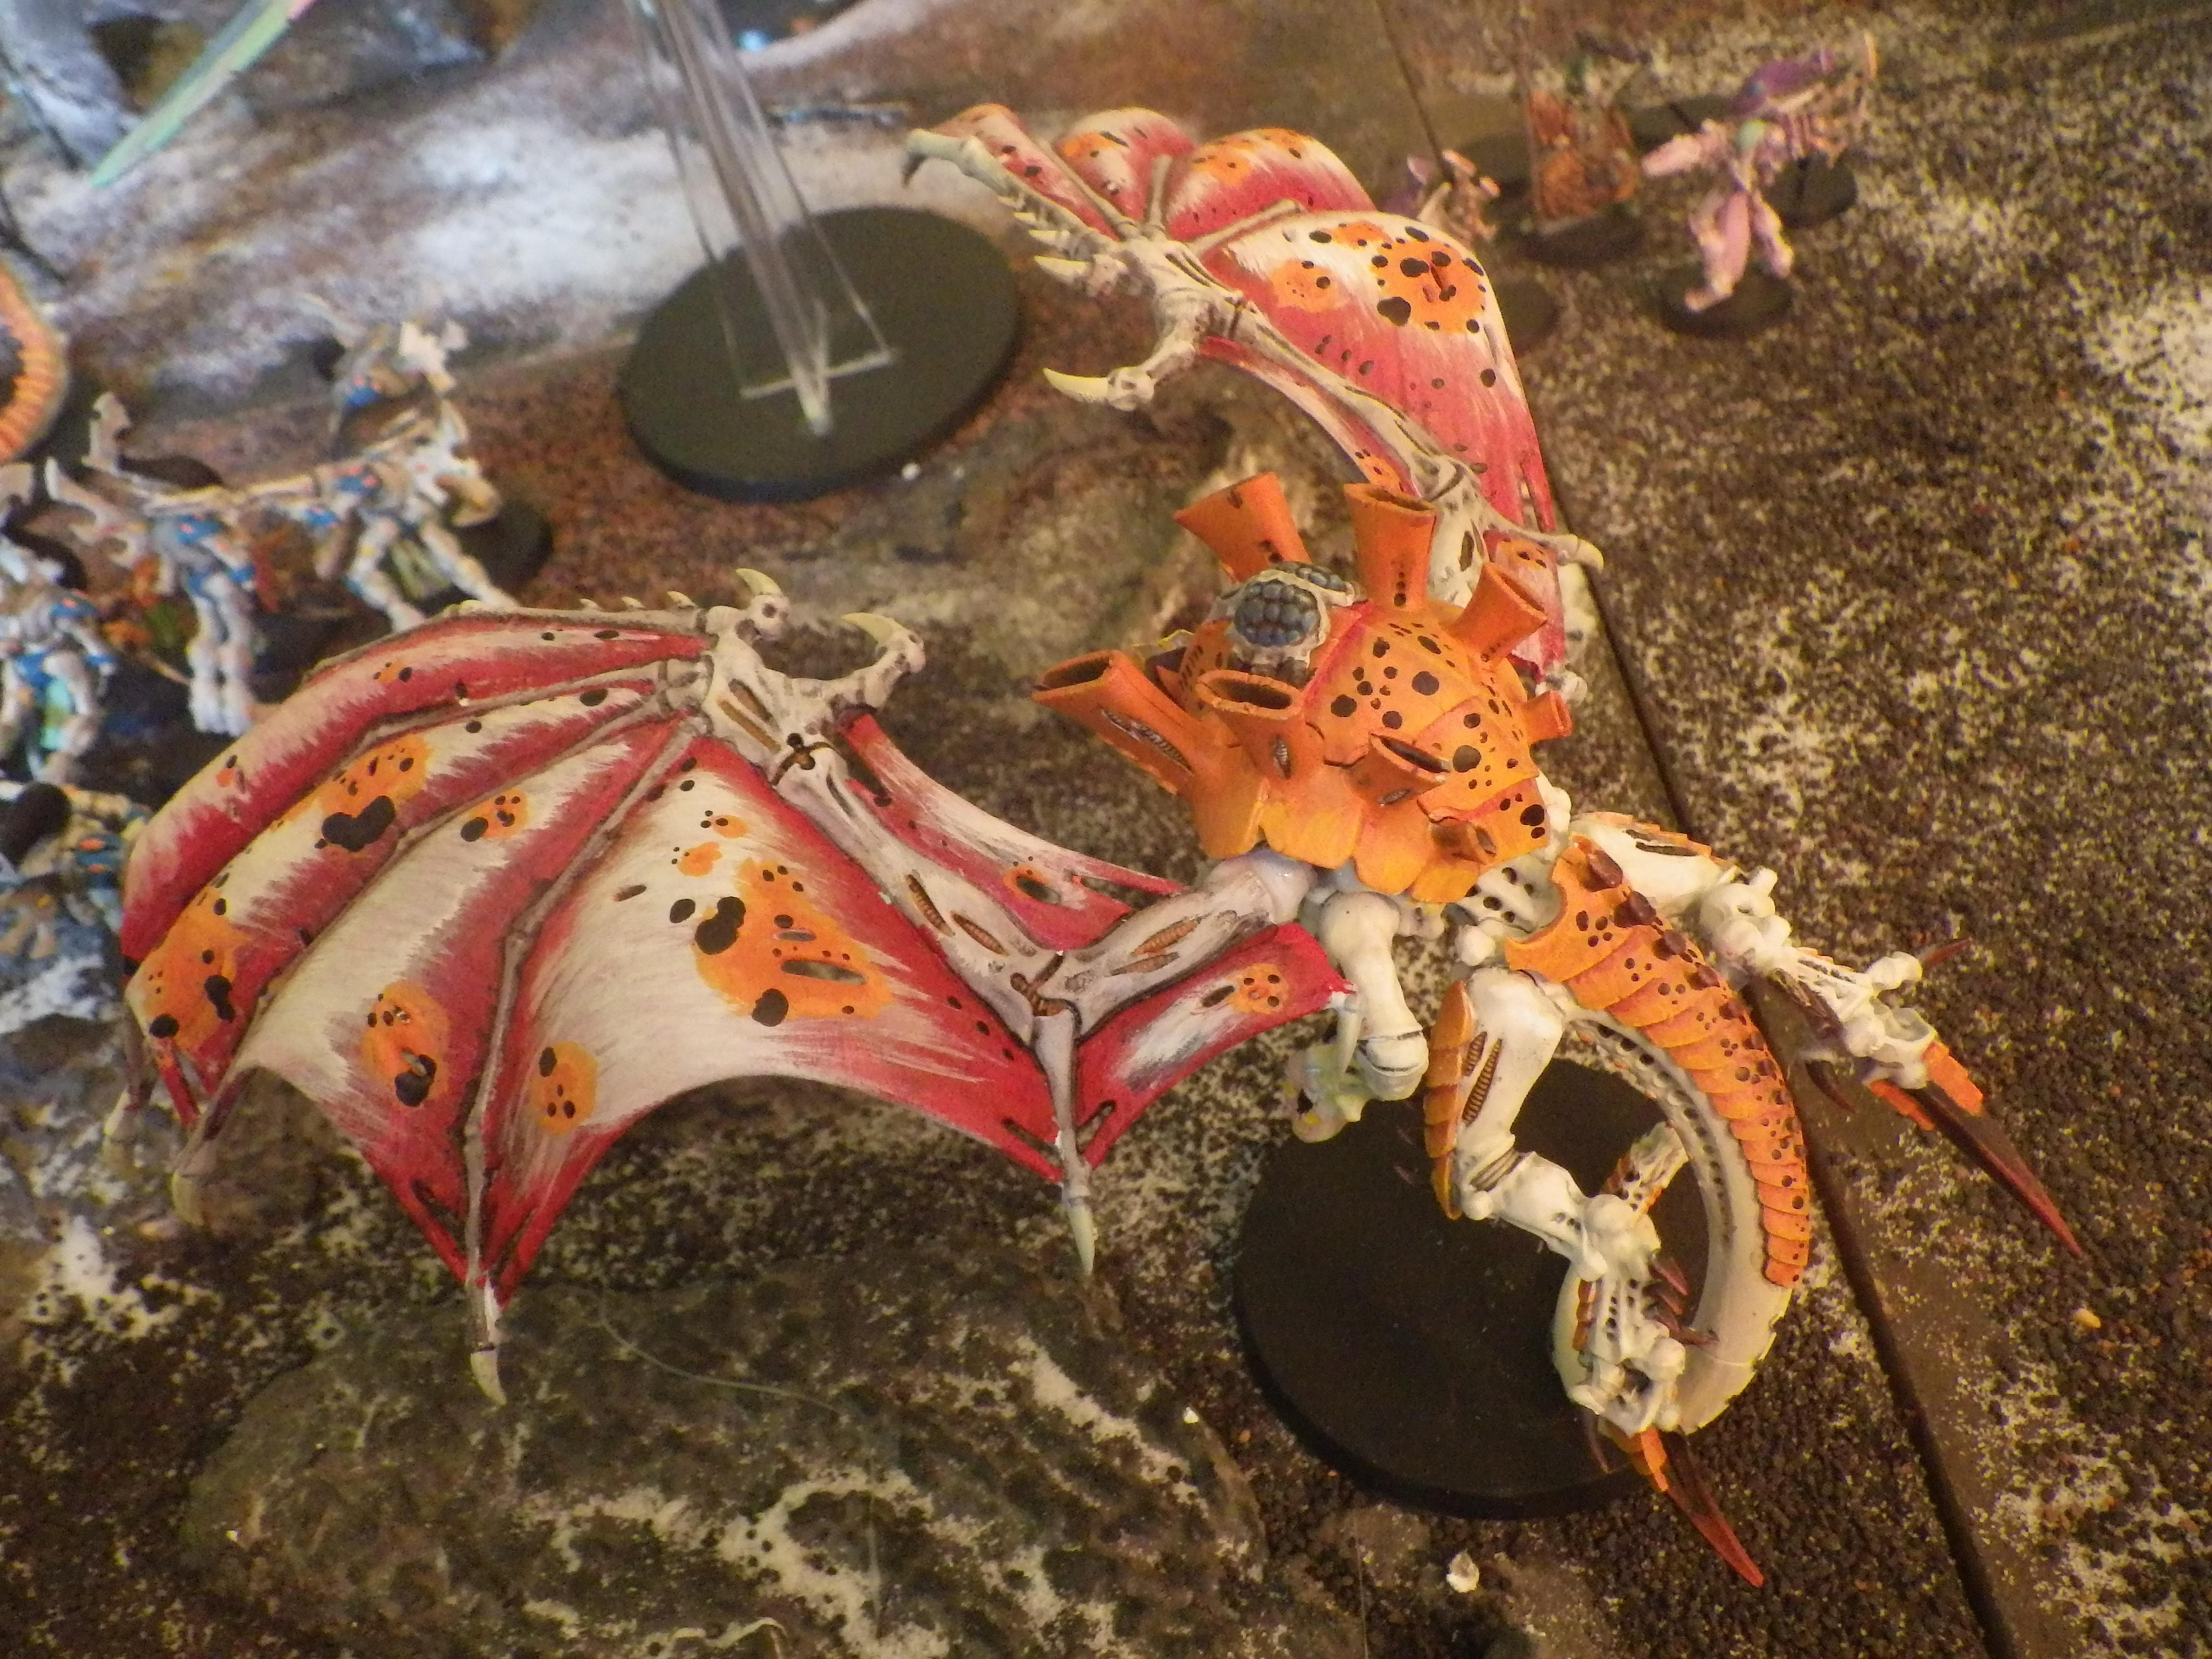 Contrast is off but my computer with photoshop is down, but heres my new blood red wings and cancer spots for my flyrant. My original wings were one of my first models and I never liked them